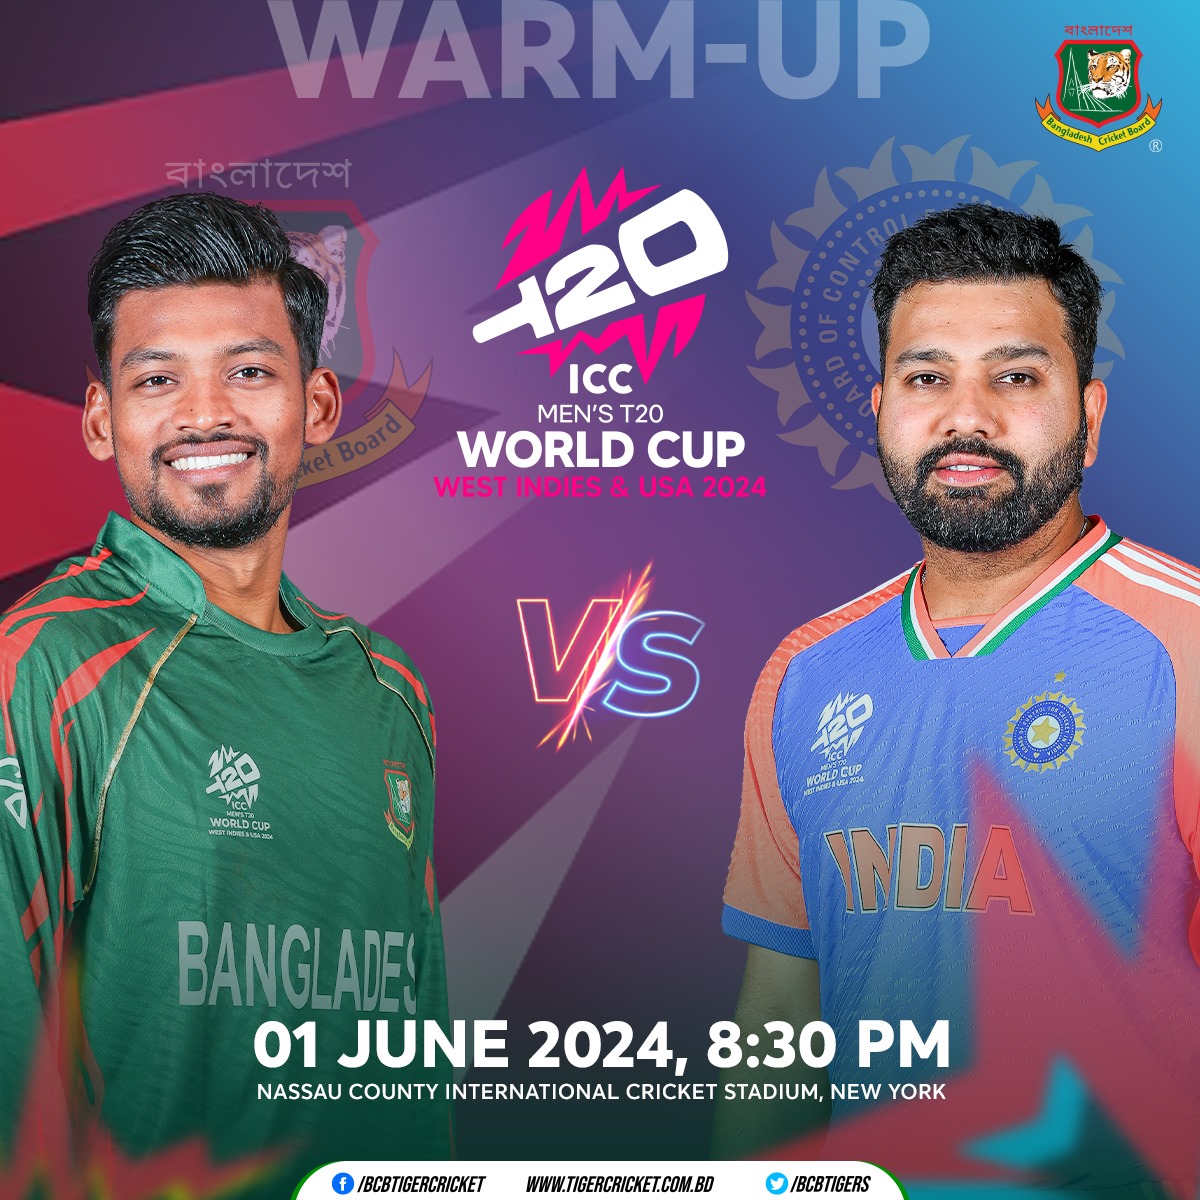 IND vs BAN Warm Up Match: Know when and where the first warm up match between India and Bangladesh will be played